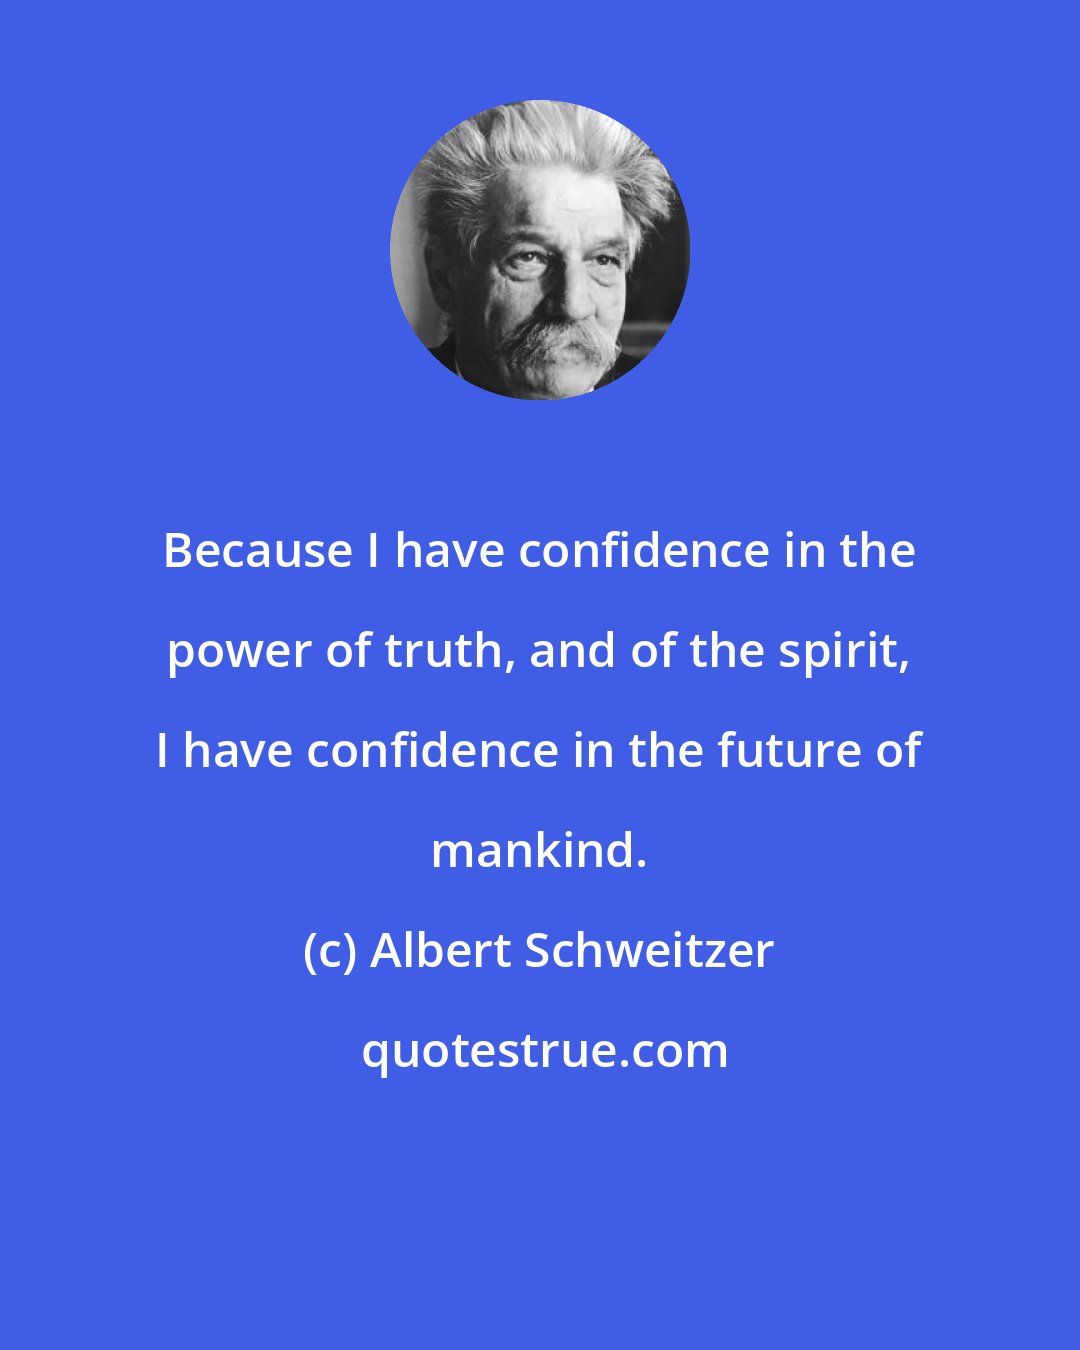 Albert Schweitzer: Because I have confidence in the power of truth, and of the spirit, I have confidence in the future of mankind.